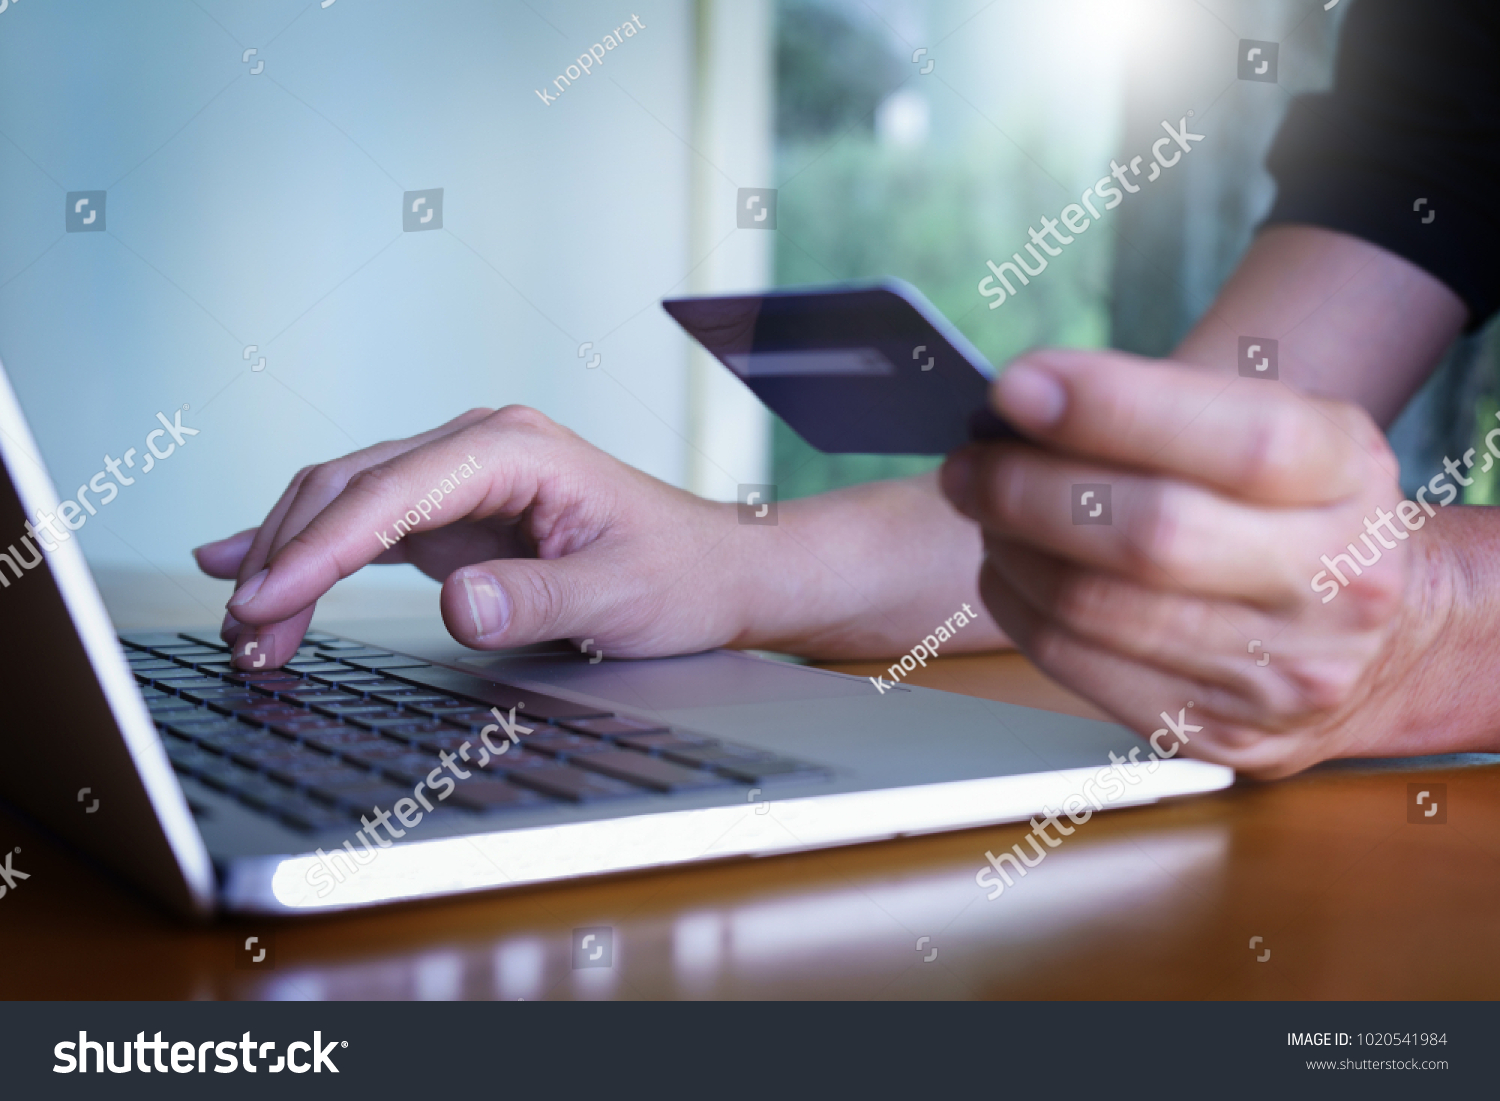 Man's hands holding credit card and typing on the keyboard of laptop, onine shopping, online payment. #1020541984